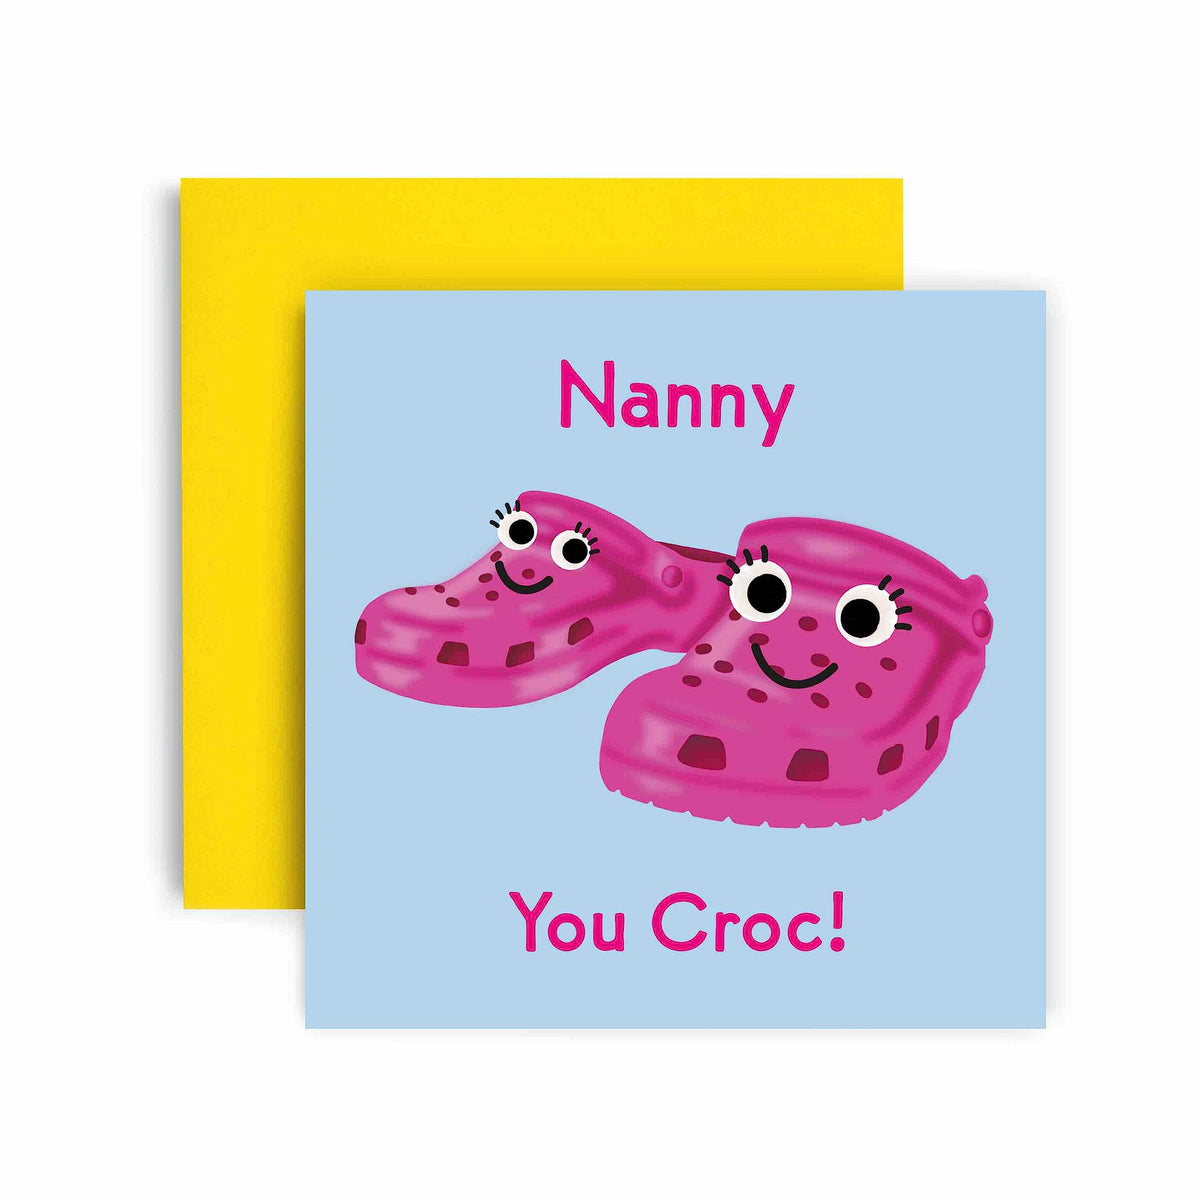 Huxters Birthday Cards for Women – You Croc Rock Nanny Happy Birthday Card for Birthday, Mother’s Day – Nanny Birthday Card with Lovely Pink Envelope – Funny Birthday Card (Nanny)